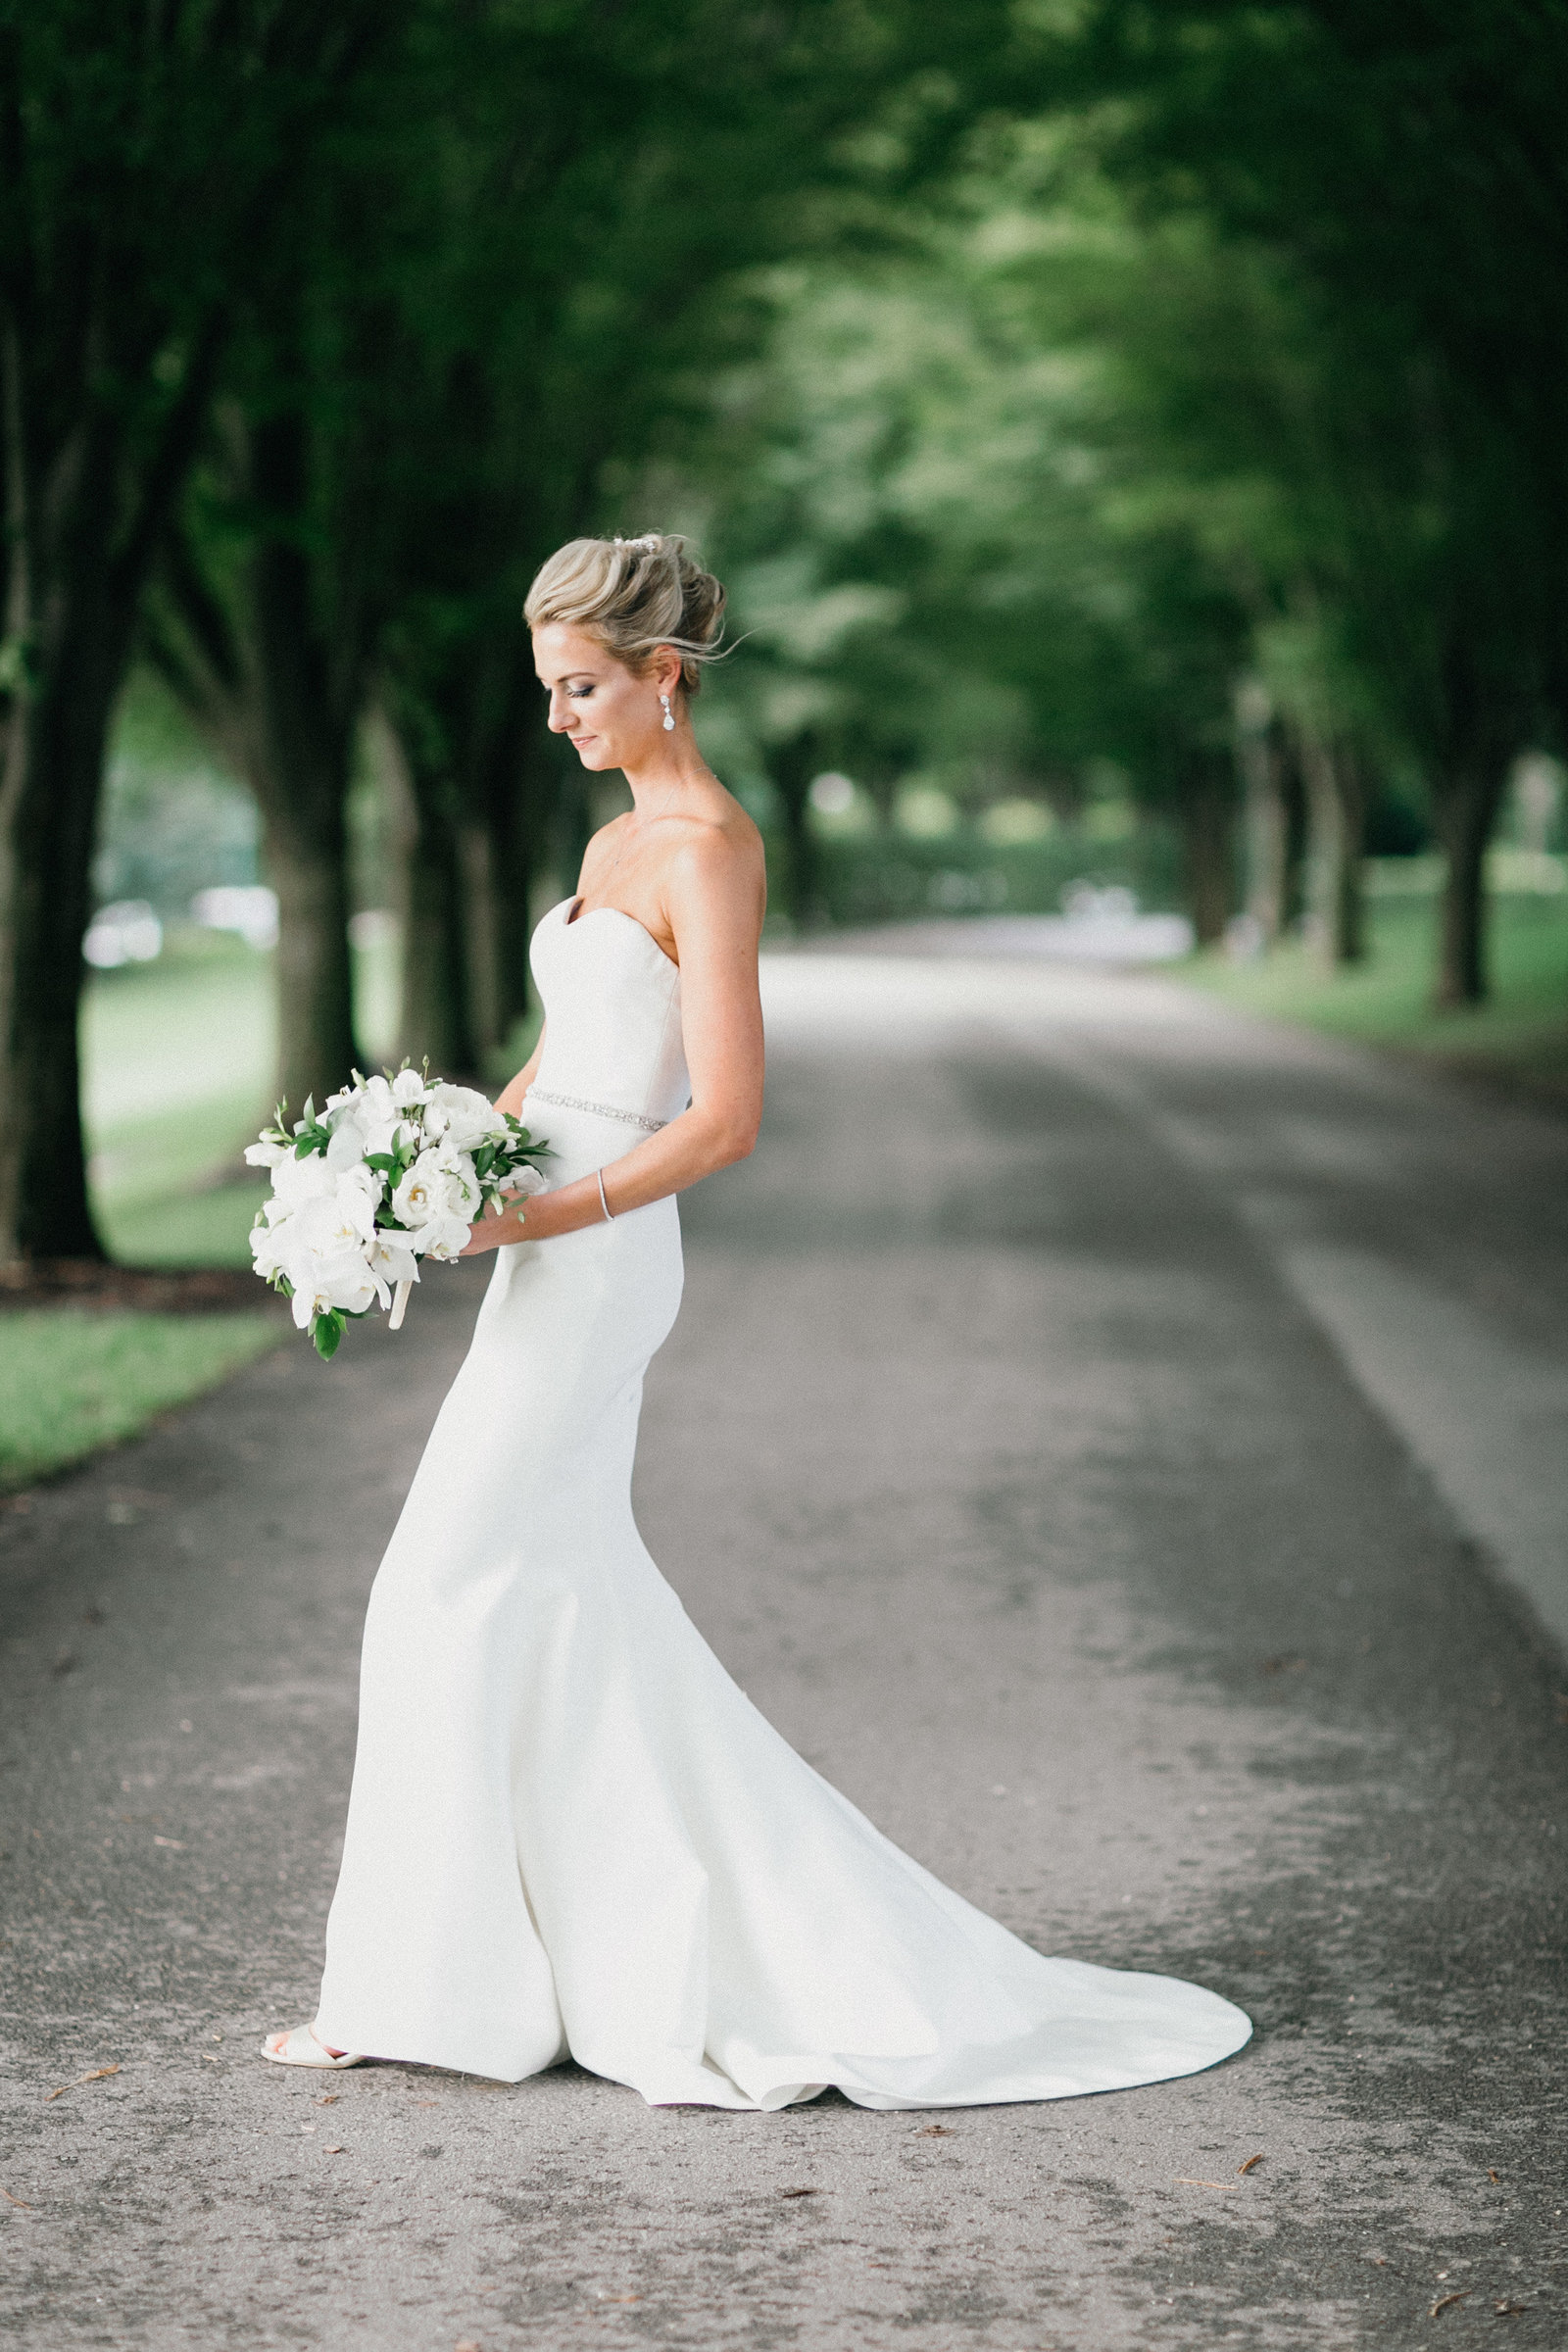 Our gorgeous bride Jessica rocked her gown. photographed at Overbrook Golf Club in Villanova.